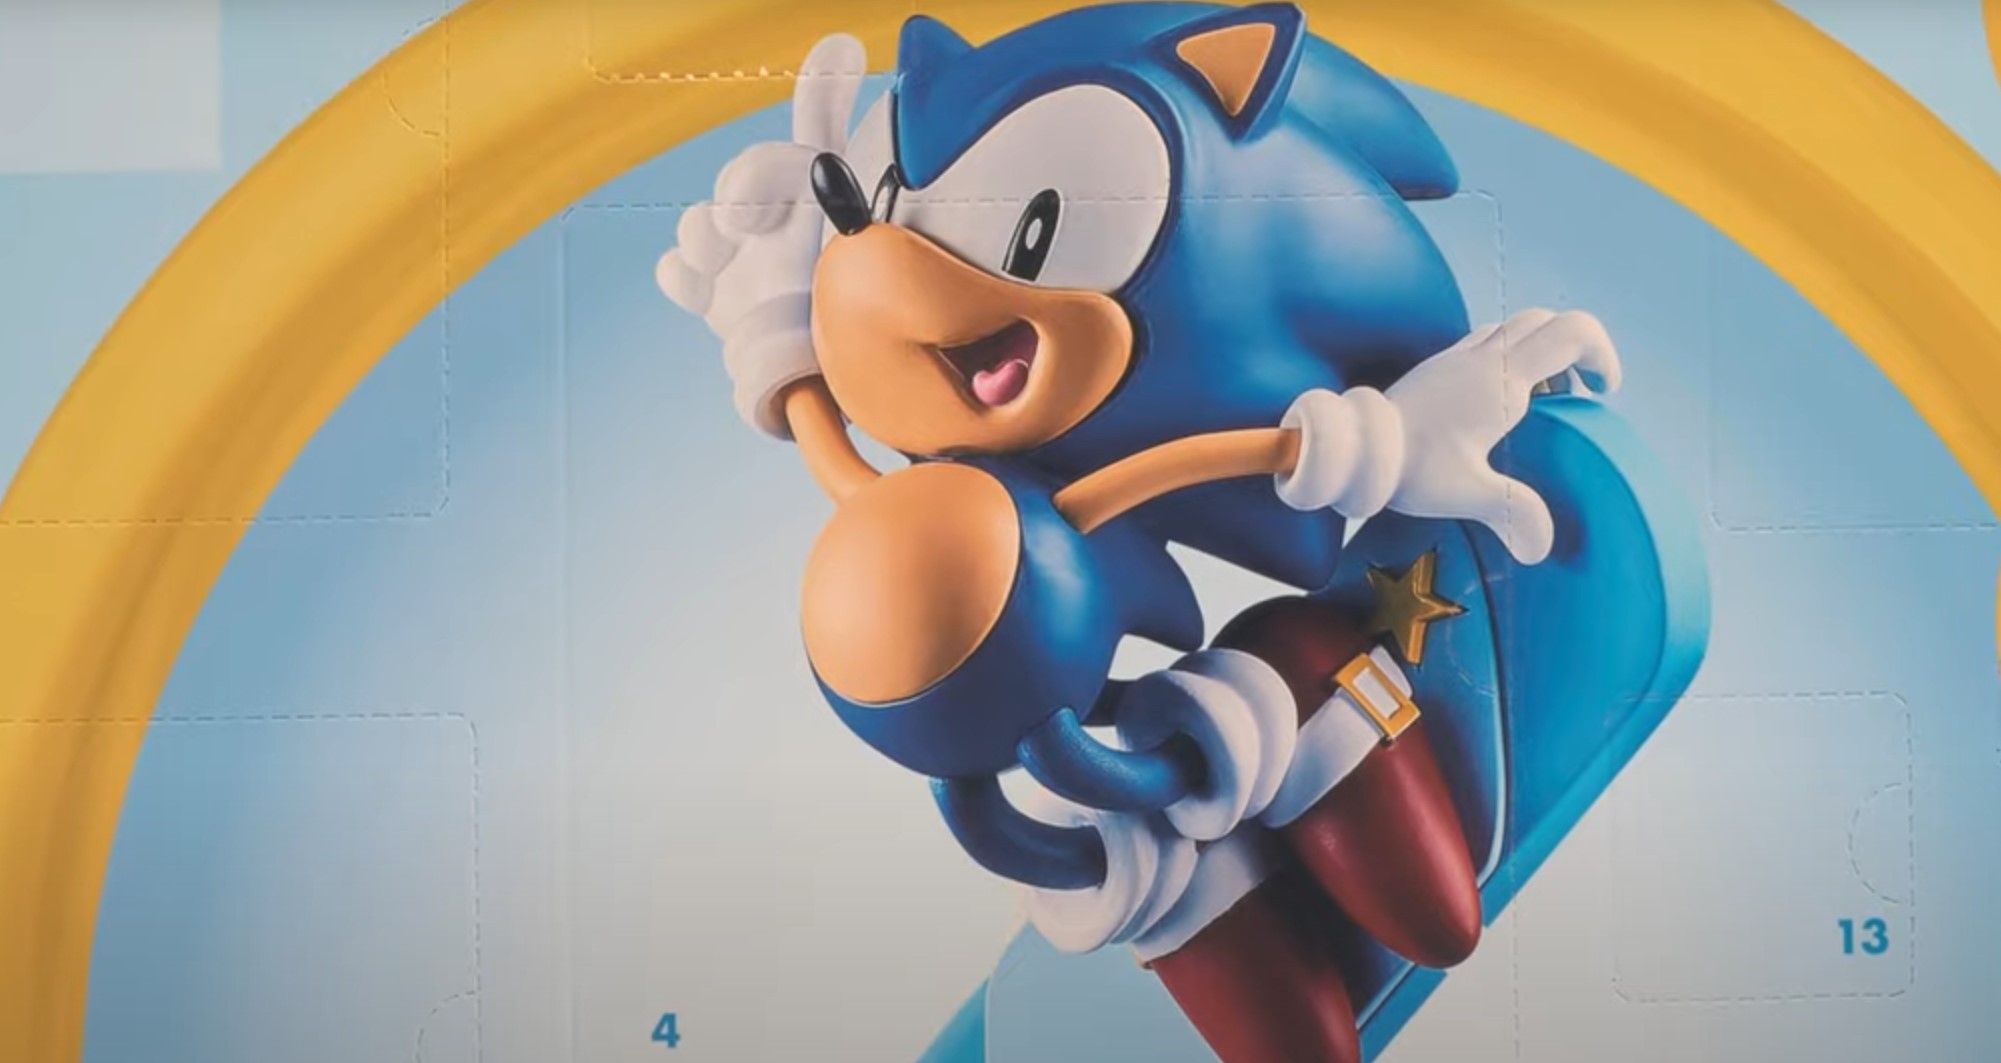 sonic-the-hedgehog-advent-calendar-gives-you-one-little-piece-of-sonic